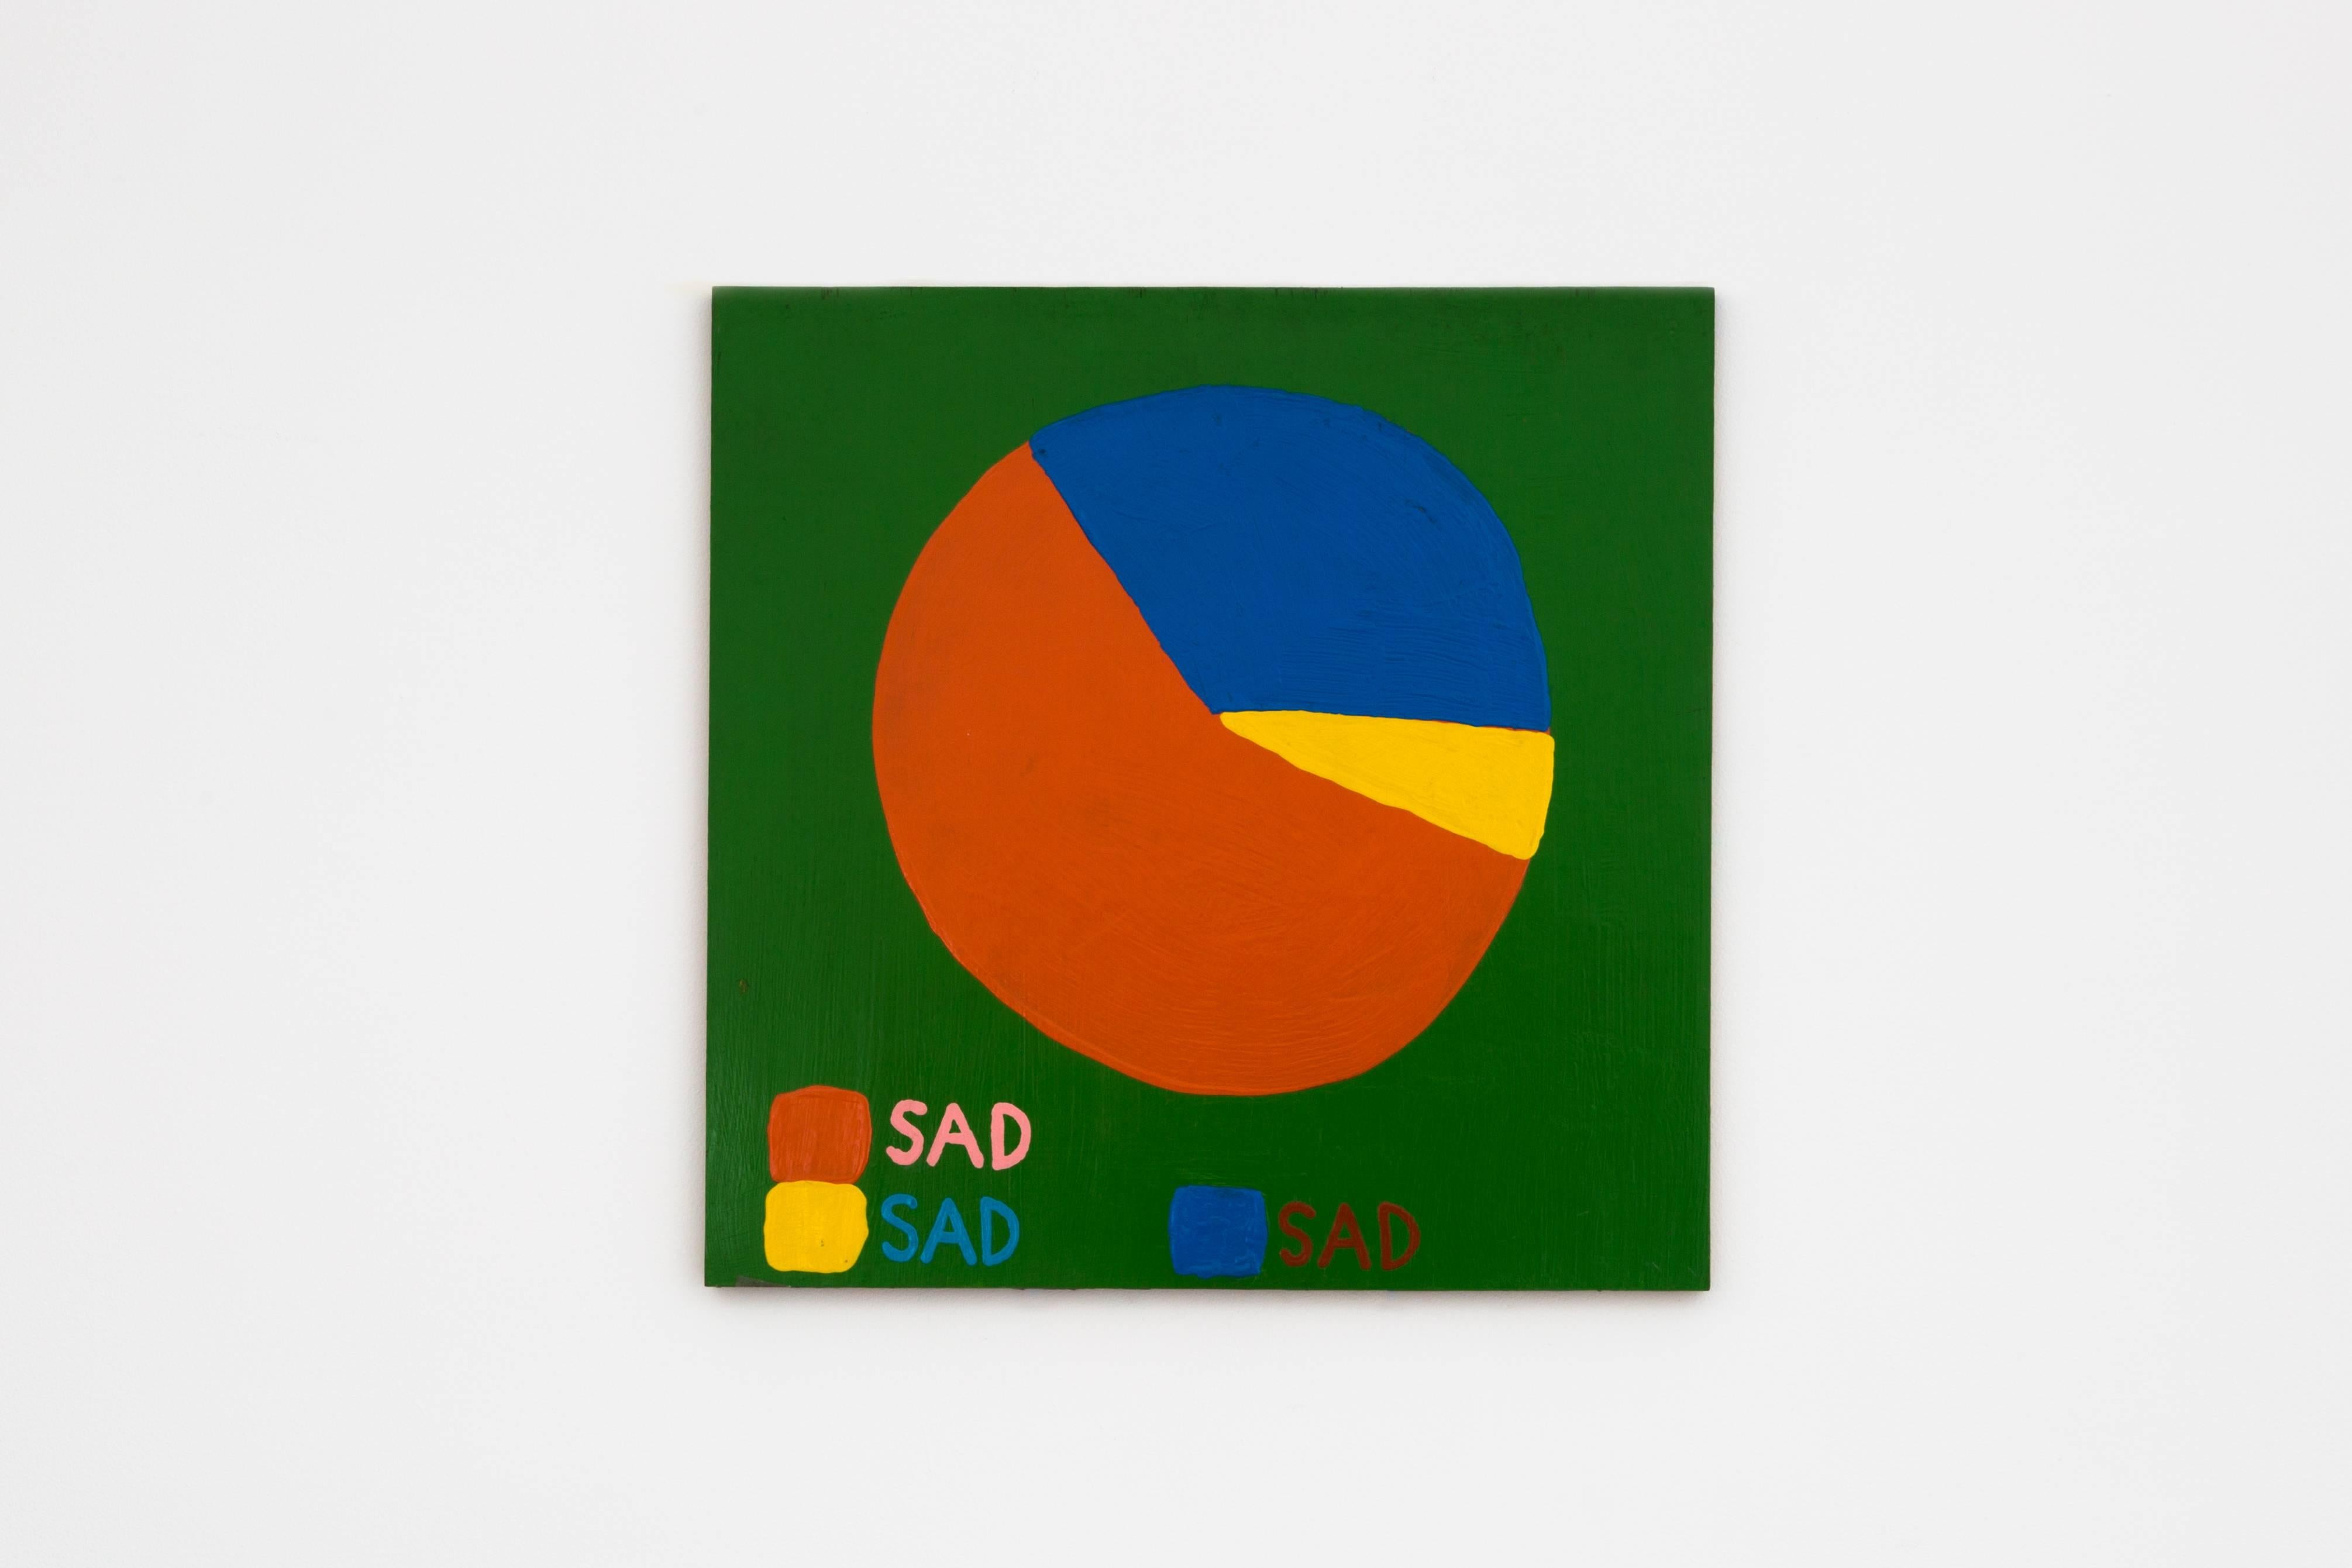 Sad (Pie Chart) - Painting by Cary Leibowitz